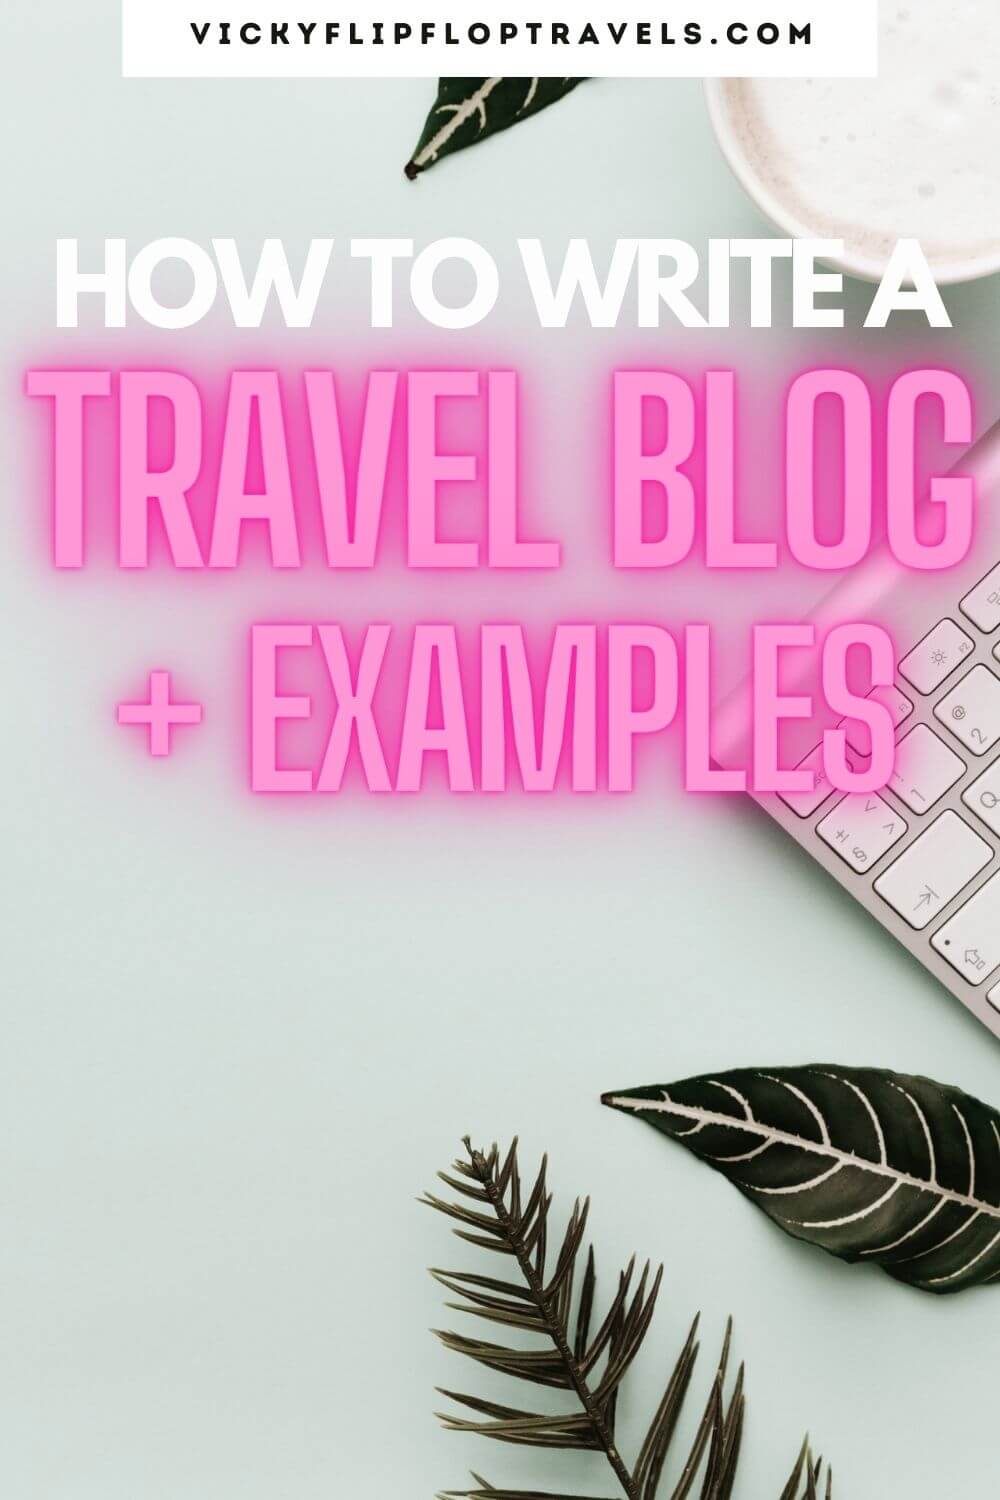 travel-bloggers-what-to-write-how-to-write-a-travel-blog